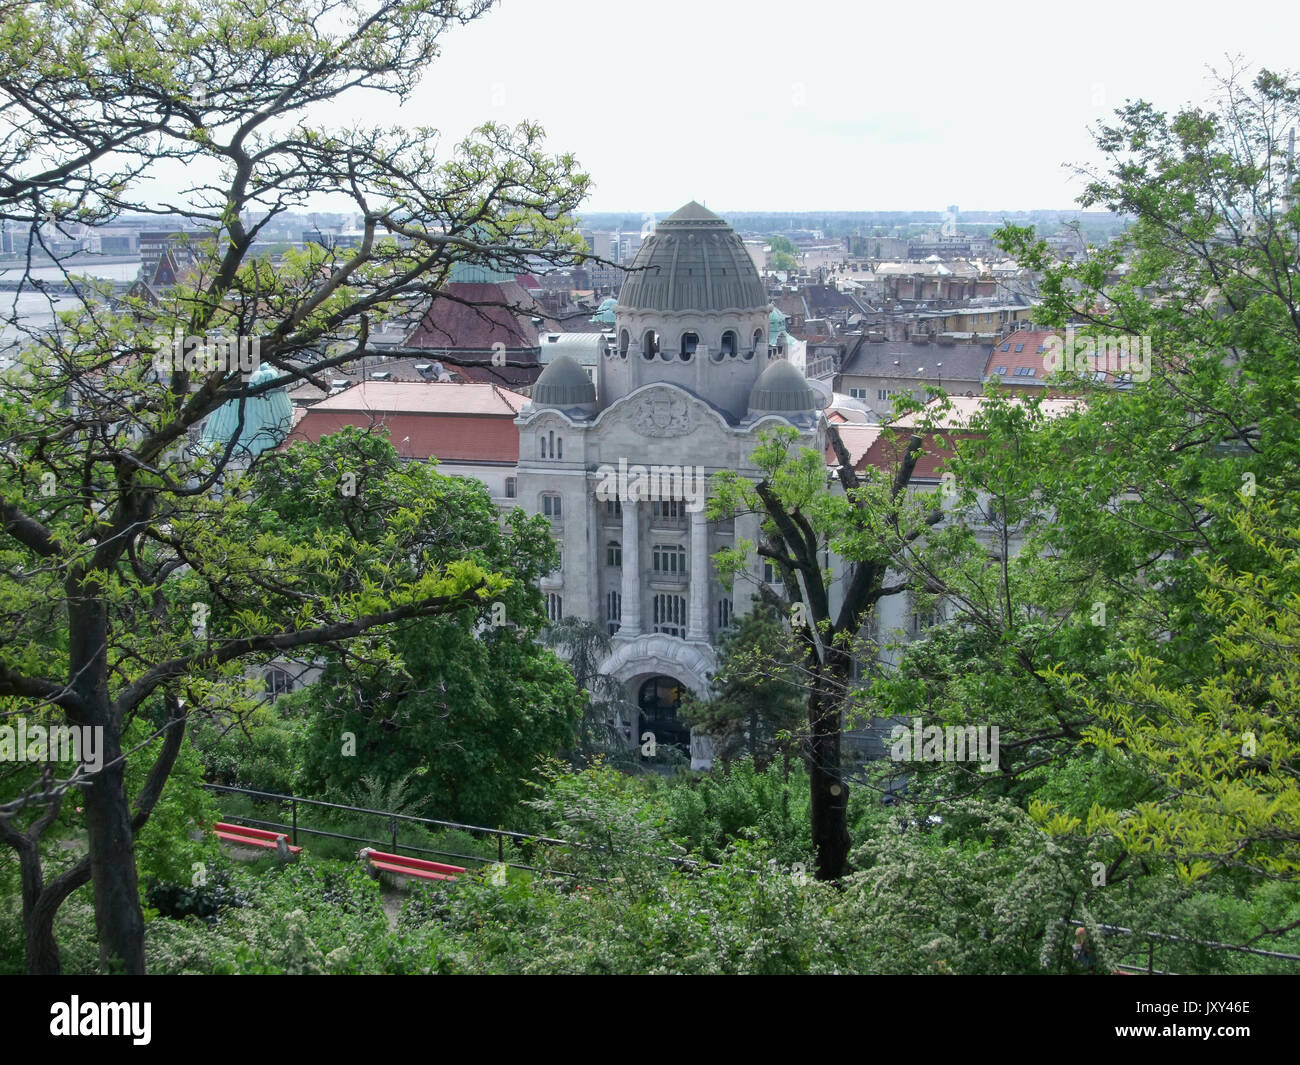 aerial view of Budapest, the capital city of Hungary in green vegetation ambiance Stock Photo